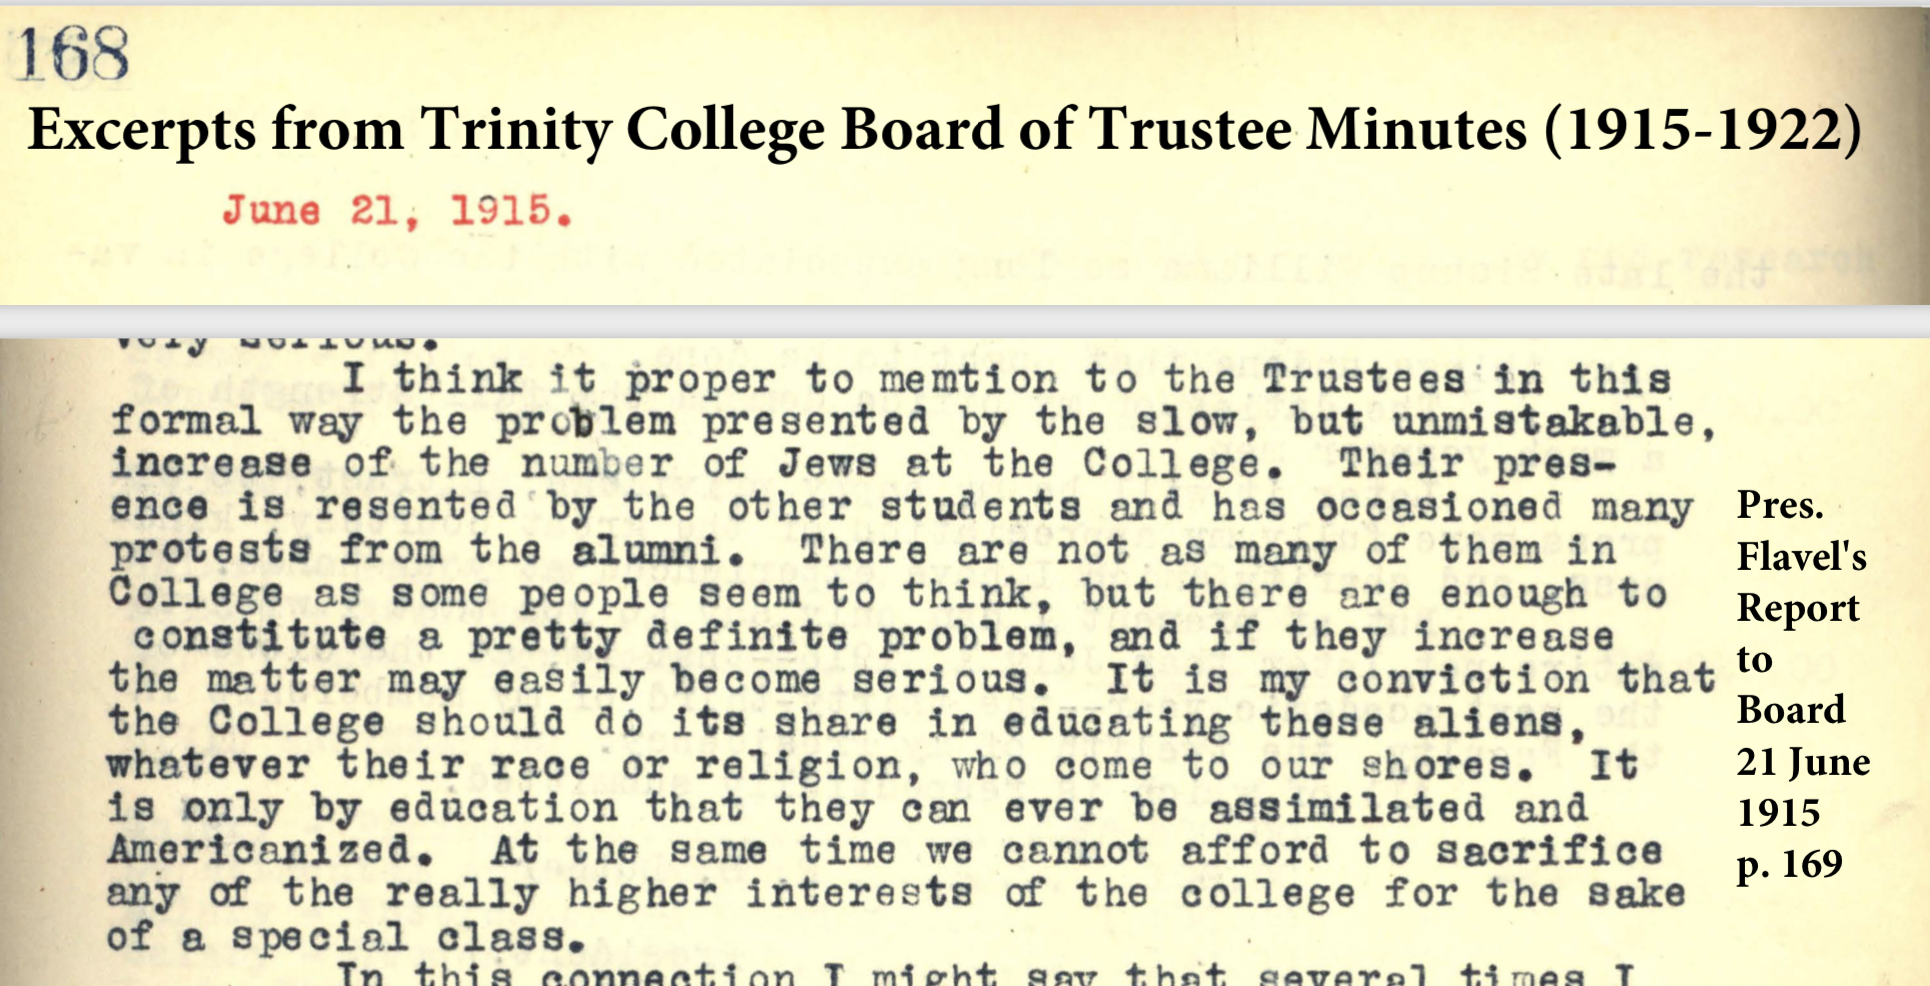 Read more about the words and actions of Trinity’s leaders in the supplemental chapter on “Uncovering Unwritten Rules Against Jewish and Black Students at Trinity College” in this book.